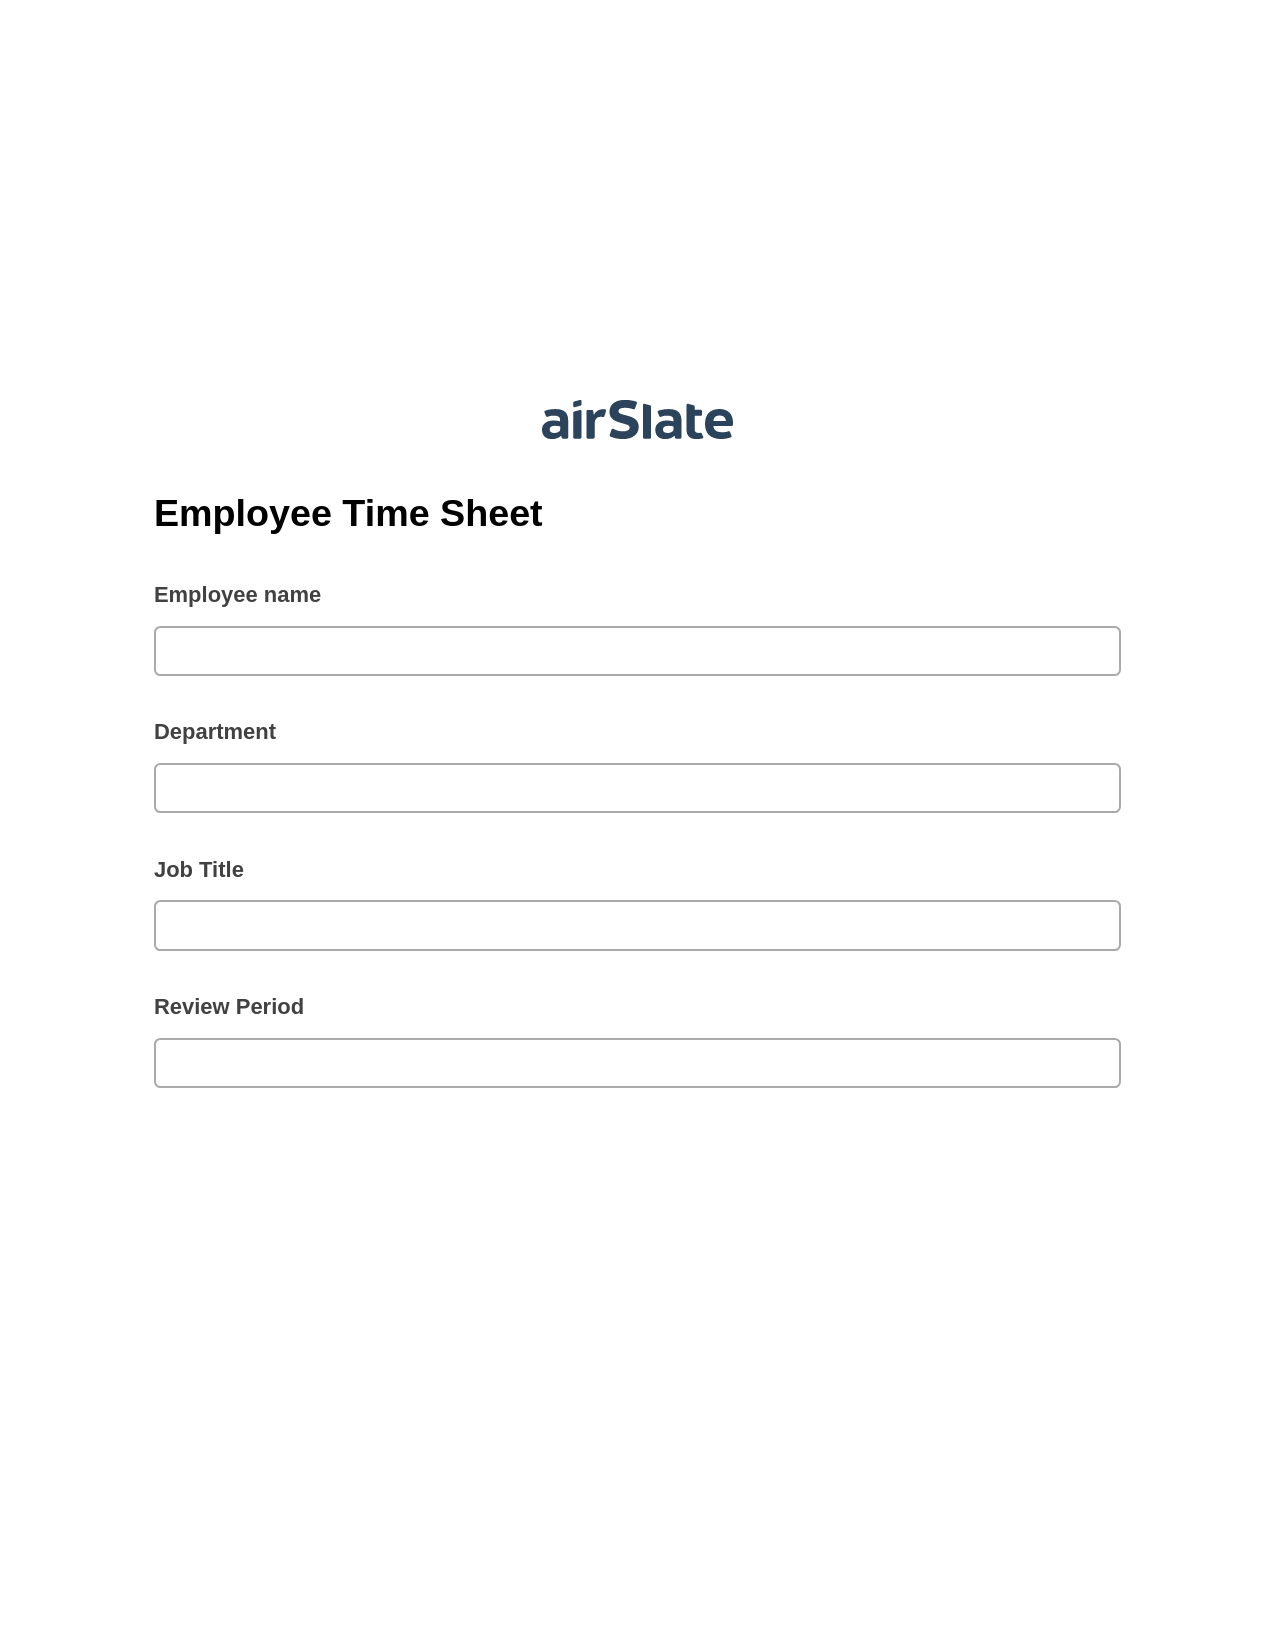 Multirole Employee Time Sheet Pre-fill from another Slate Bot, Webhook Bot, Archive to Dropbox Bot